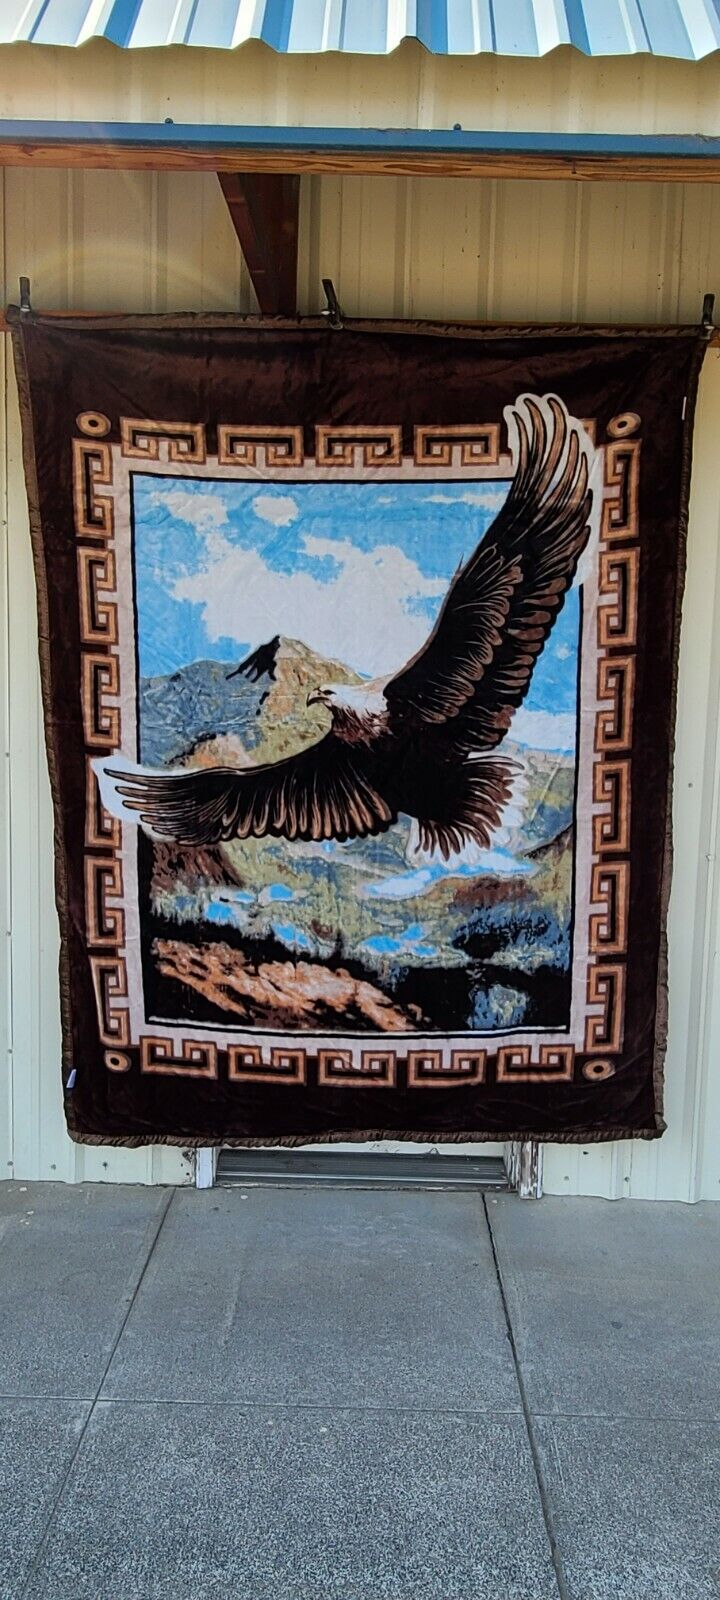 EAGLE FLYING MOUNTAINS AND WOLF TWO PLY KING SIZE BLANKET BEDSPREAD Tanie popularne